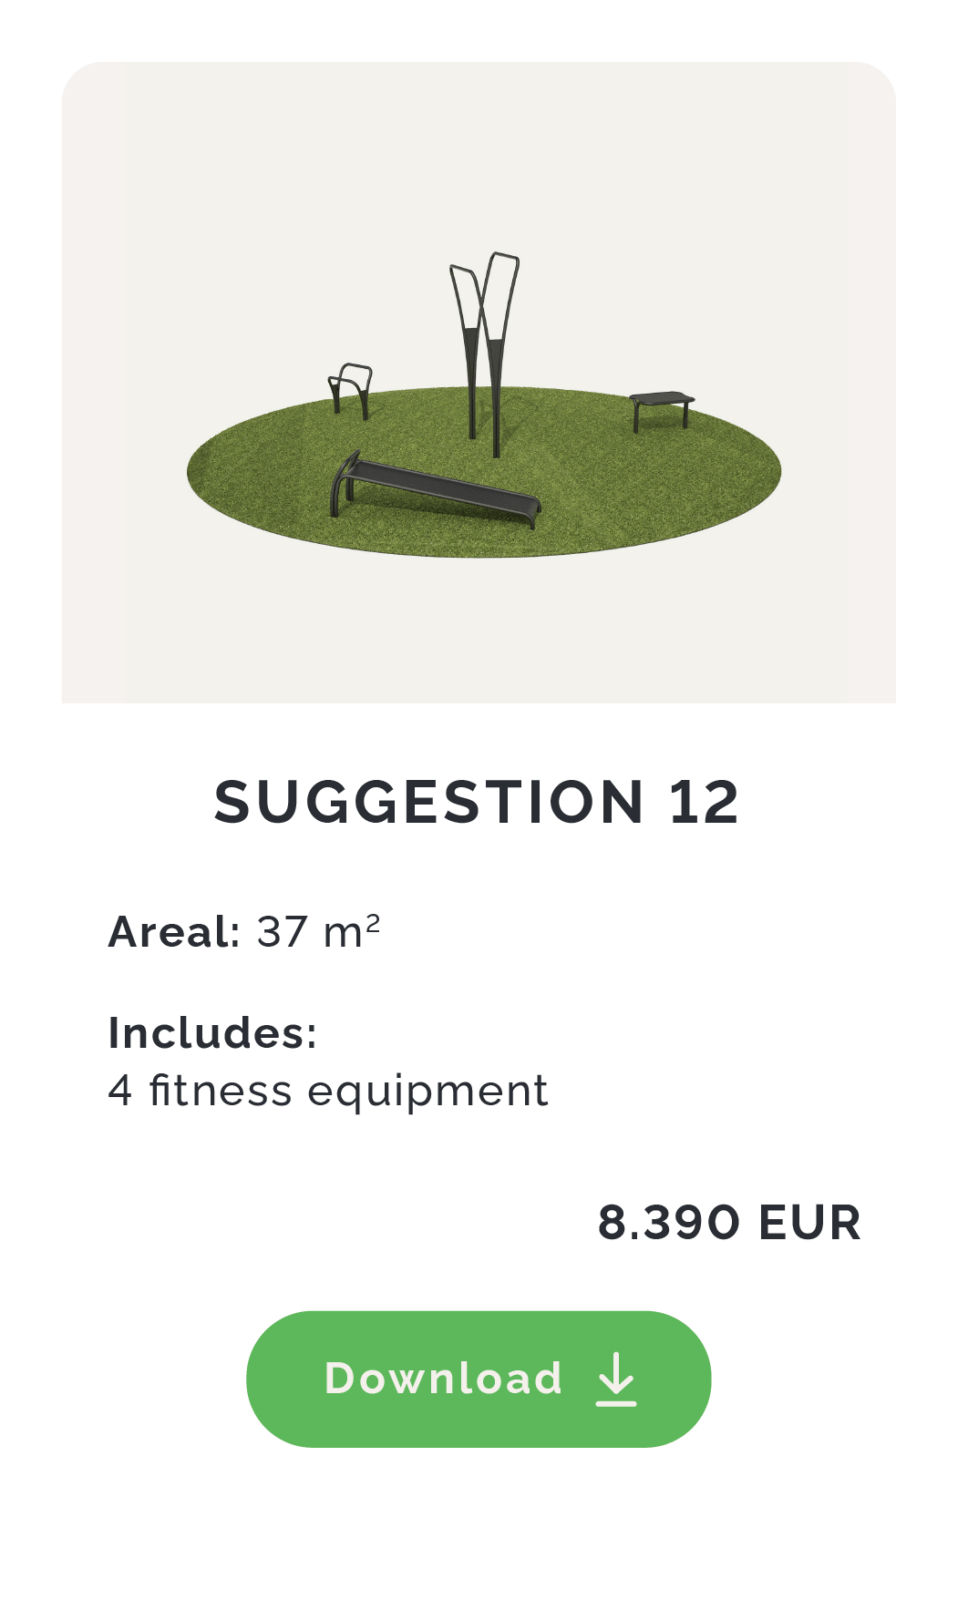 NOORD idea for an elegant fitness area with durable equipment